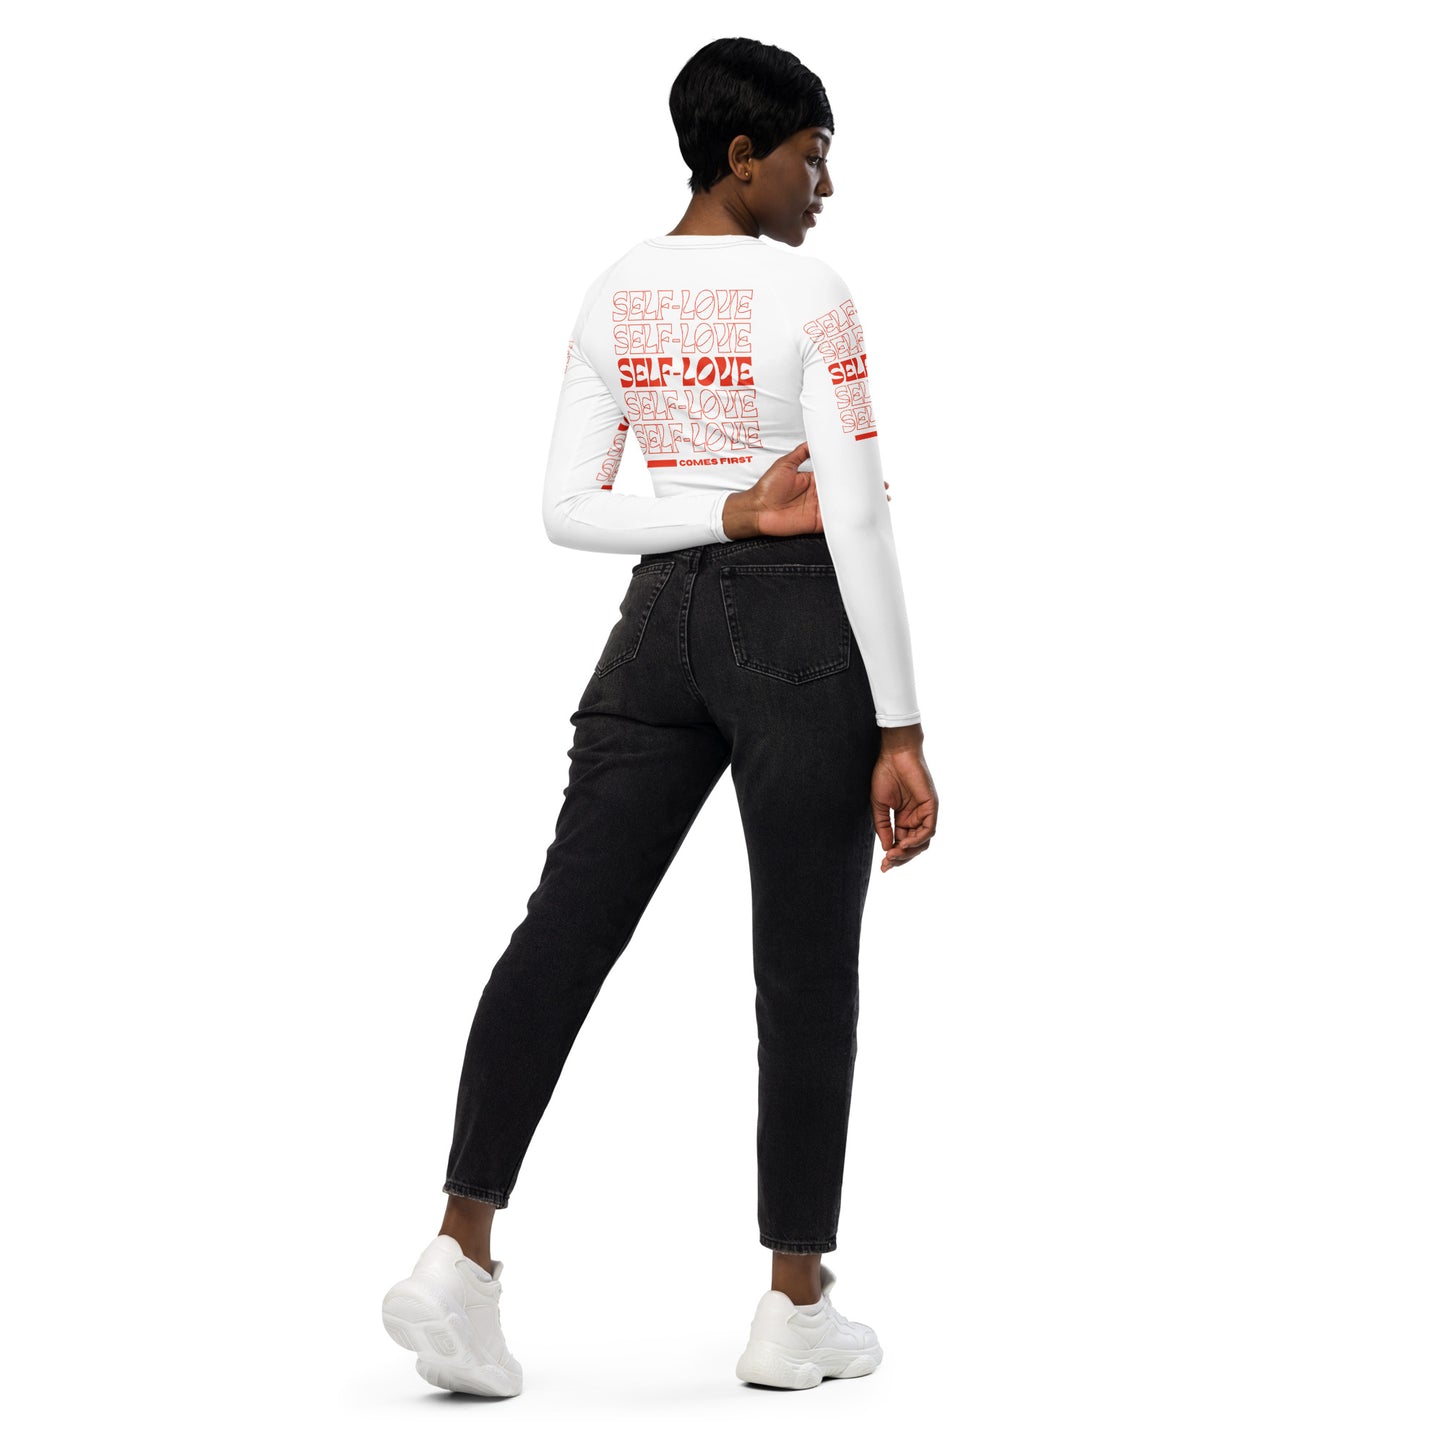 Self-Love Comes First Recycled long-sleeve crop top